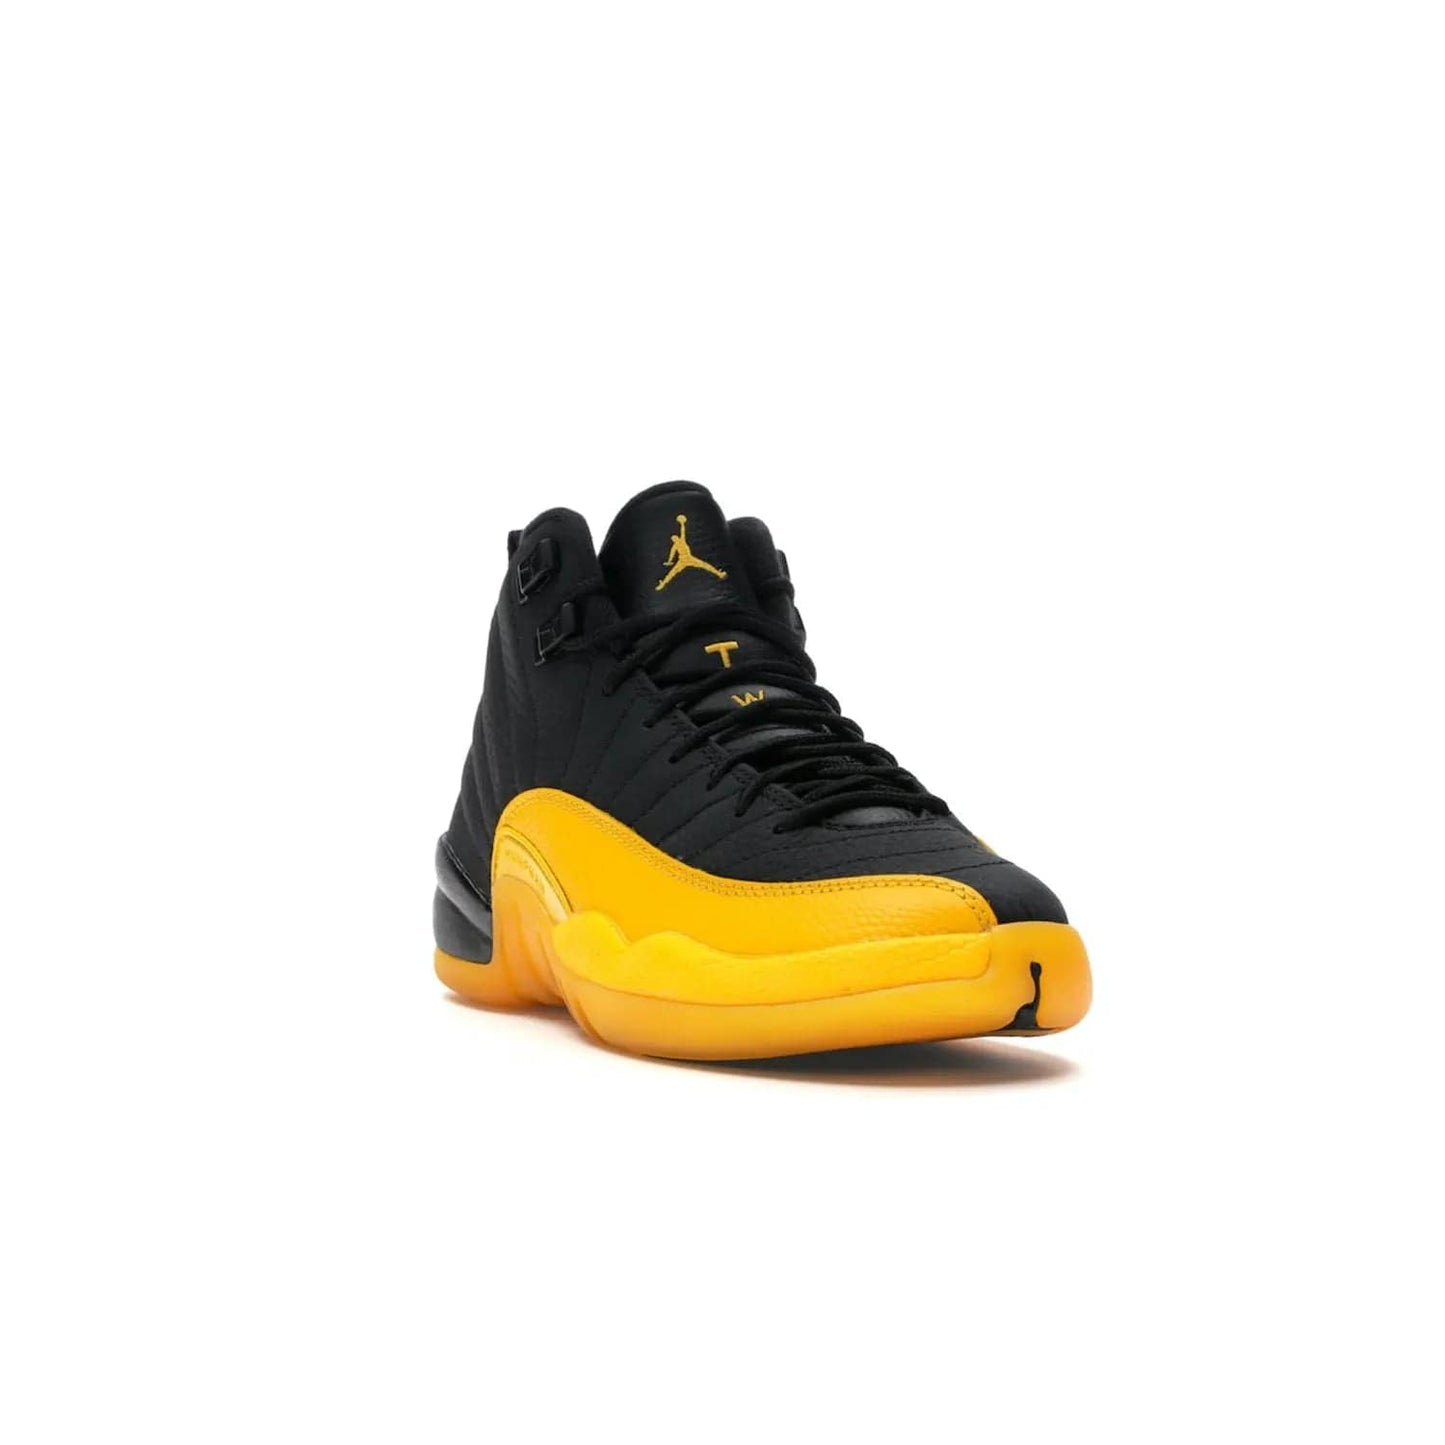 Jordan 12 Retro Black University Gold (GS) - Image 7 - Only at www.BallersClubKickz.com - Upgrade your kid's shoe collection with the Jordan 12 Retro Black University Gold. With classic style, black tumbled leather upper, and University Gold accents, it's a great summer look. Out July 2020.